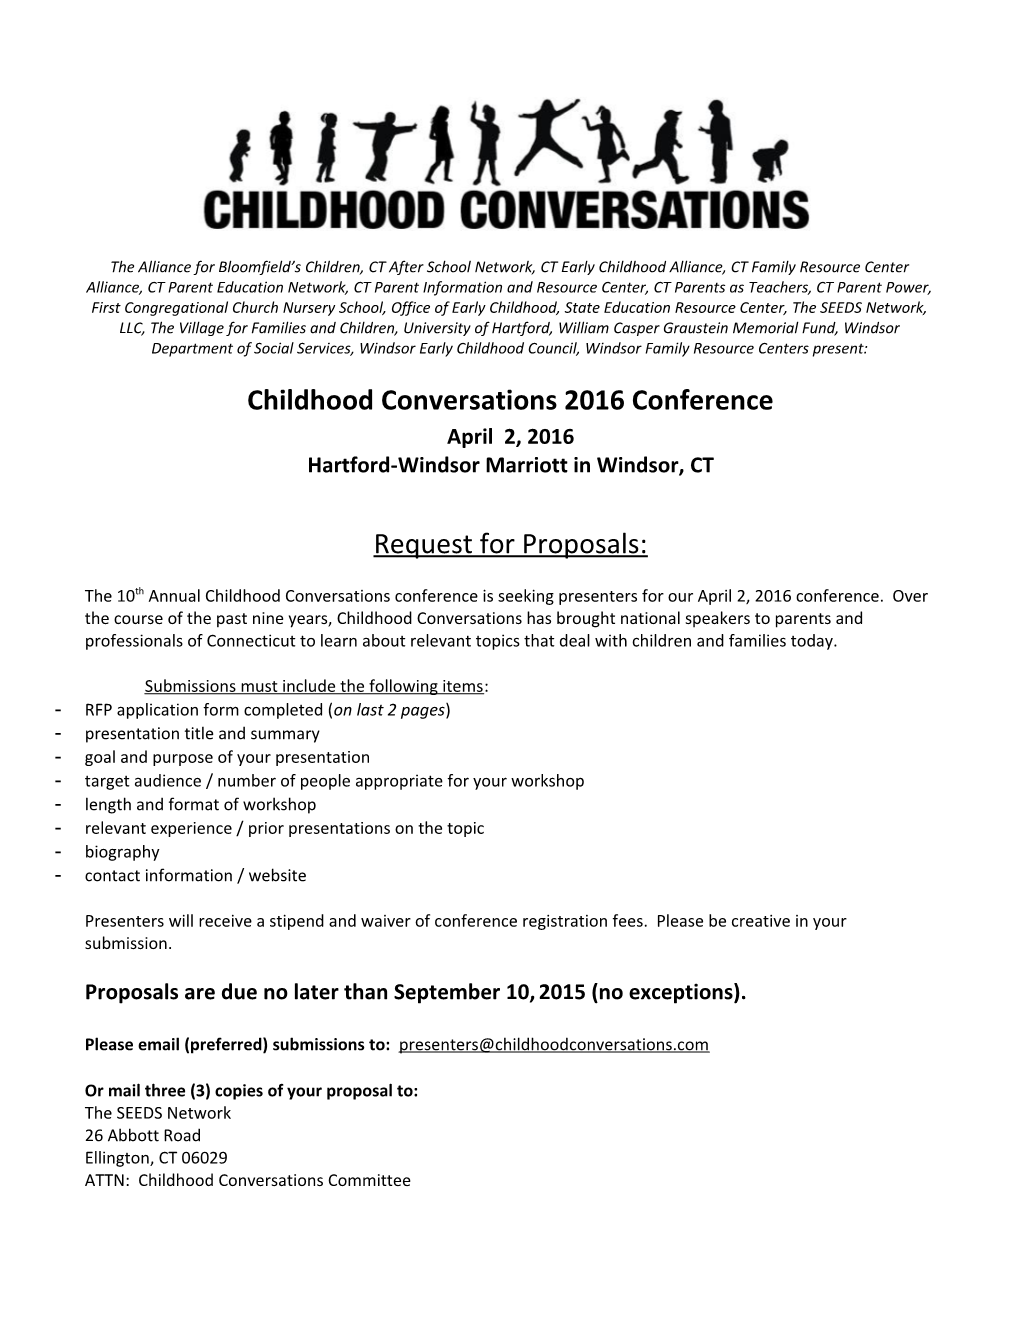 Childhood Conversations 2016 Conference